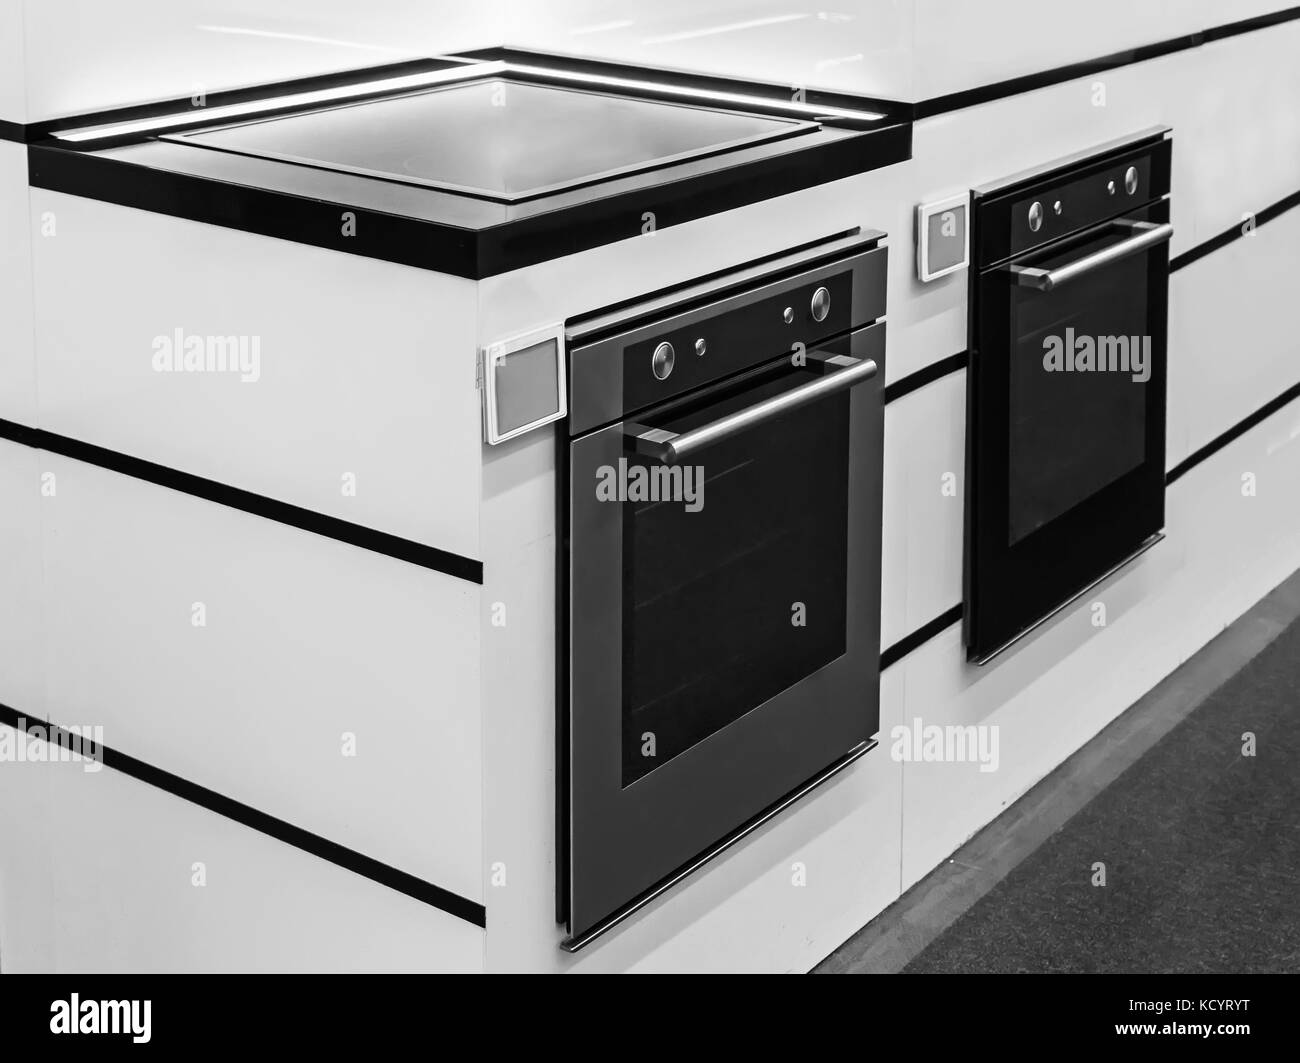 In the store on display demonstrates modern electric oven. Stock Photo